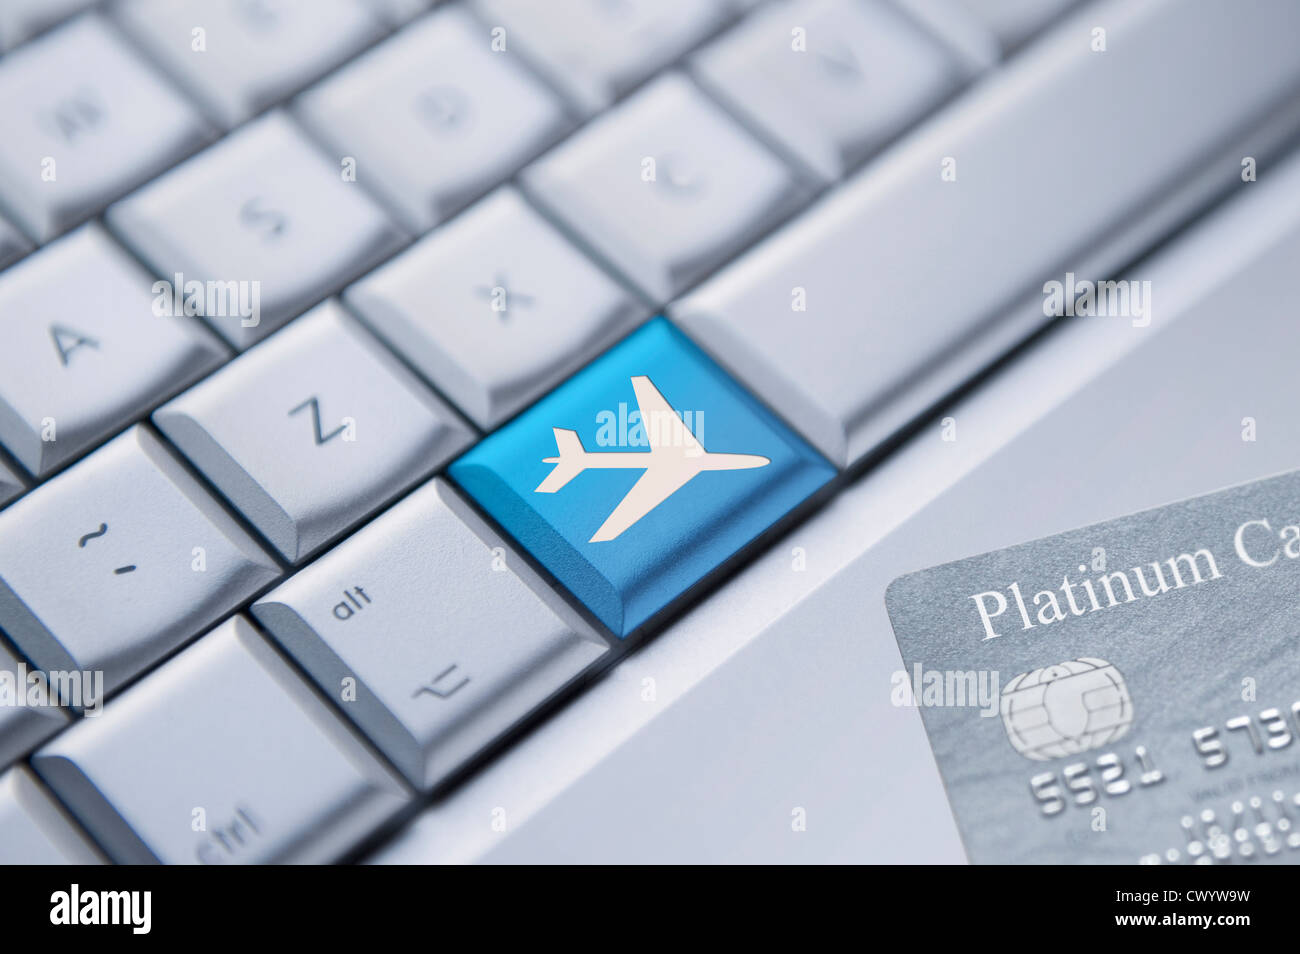 Detail of a laptop keyboard with one blue key with an plane symbol on it and a credit card at the bottom right corner. Stock Photo